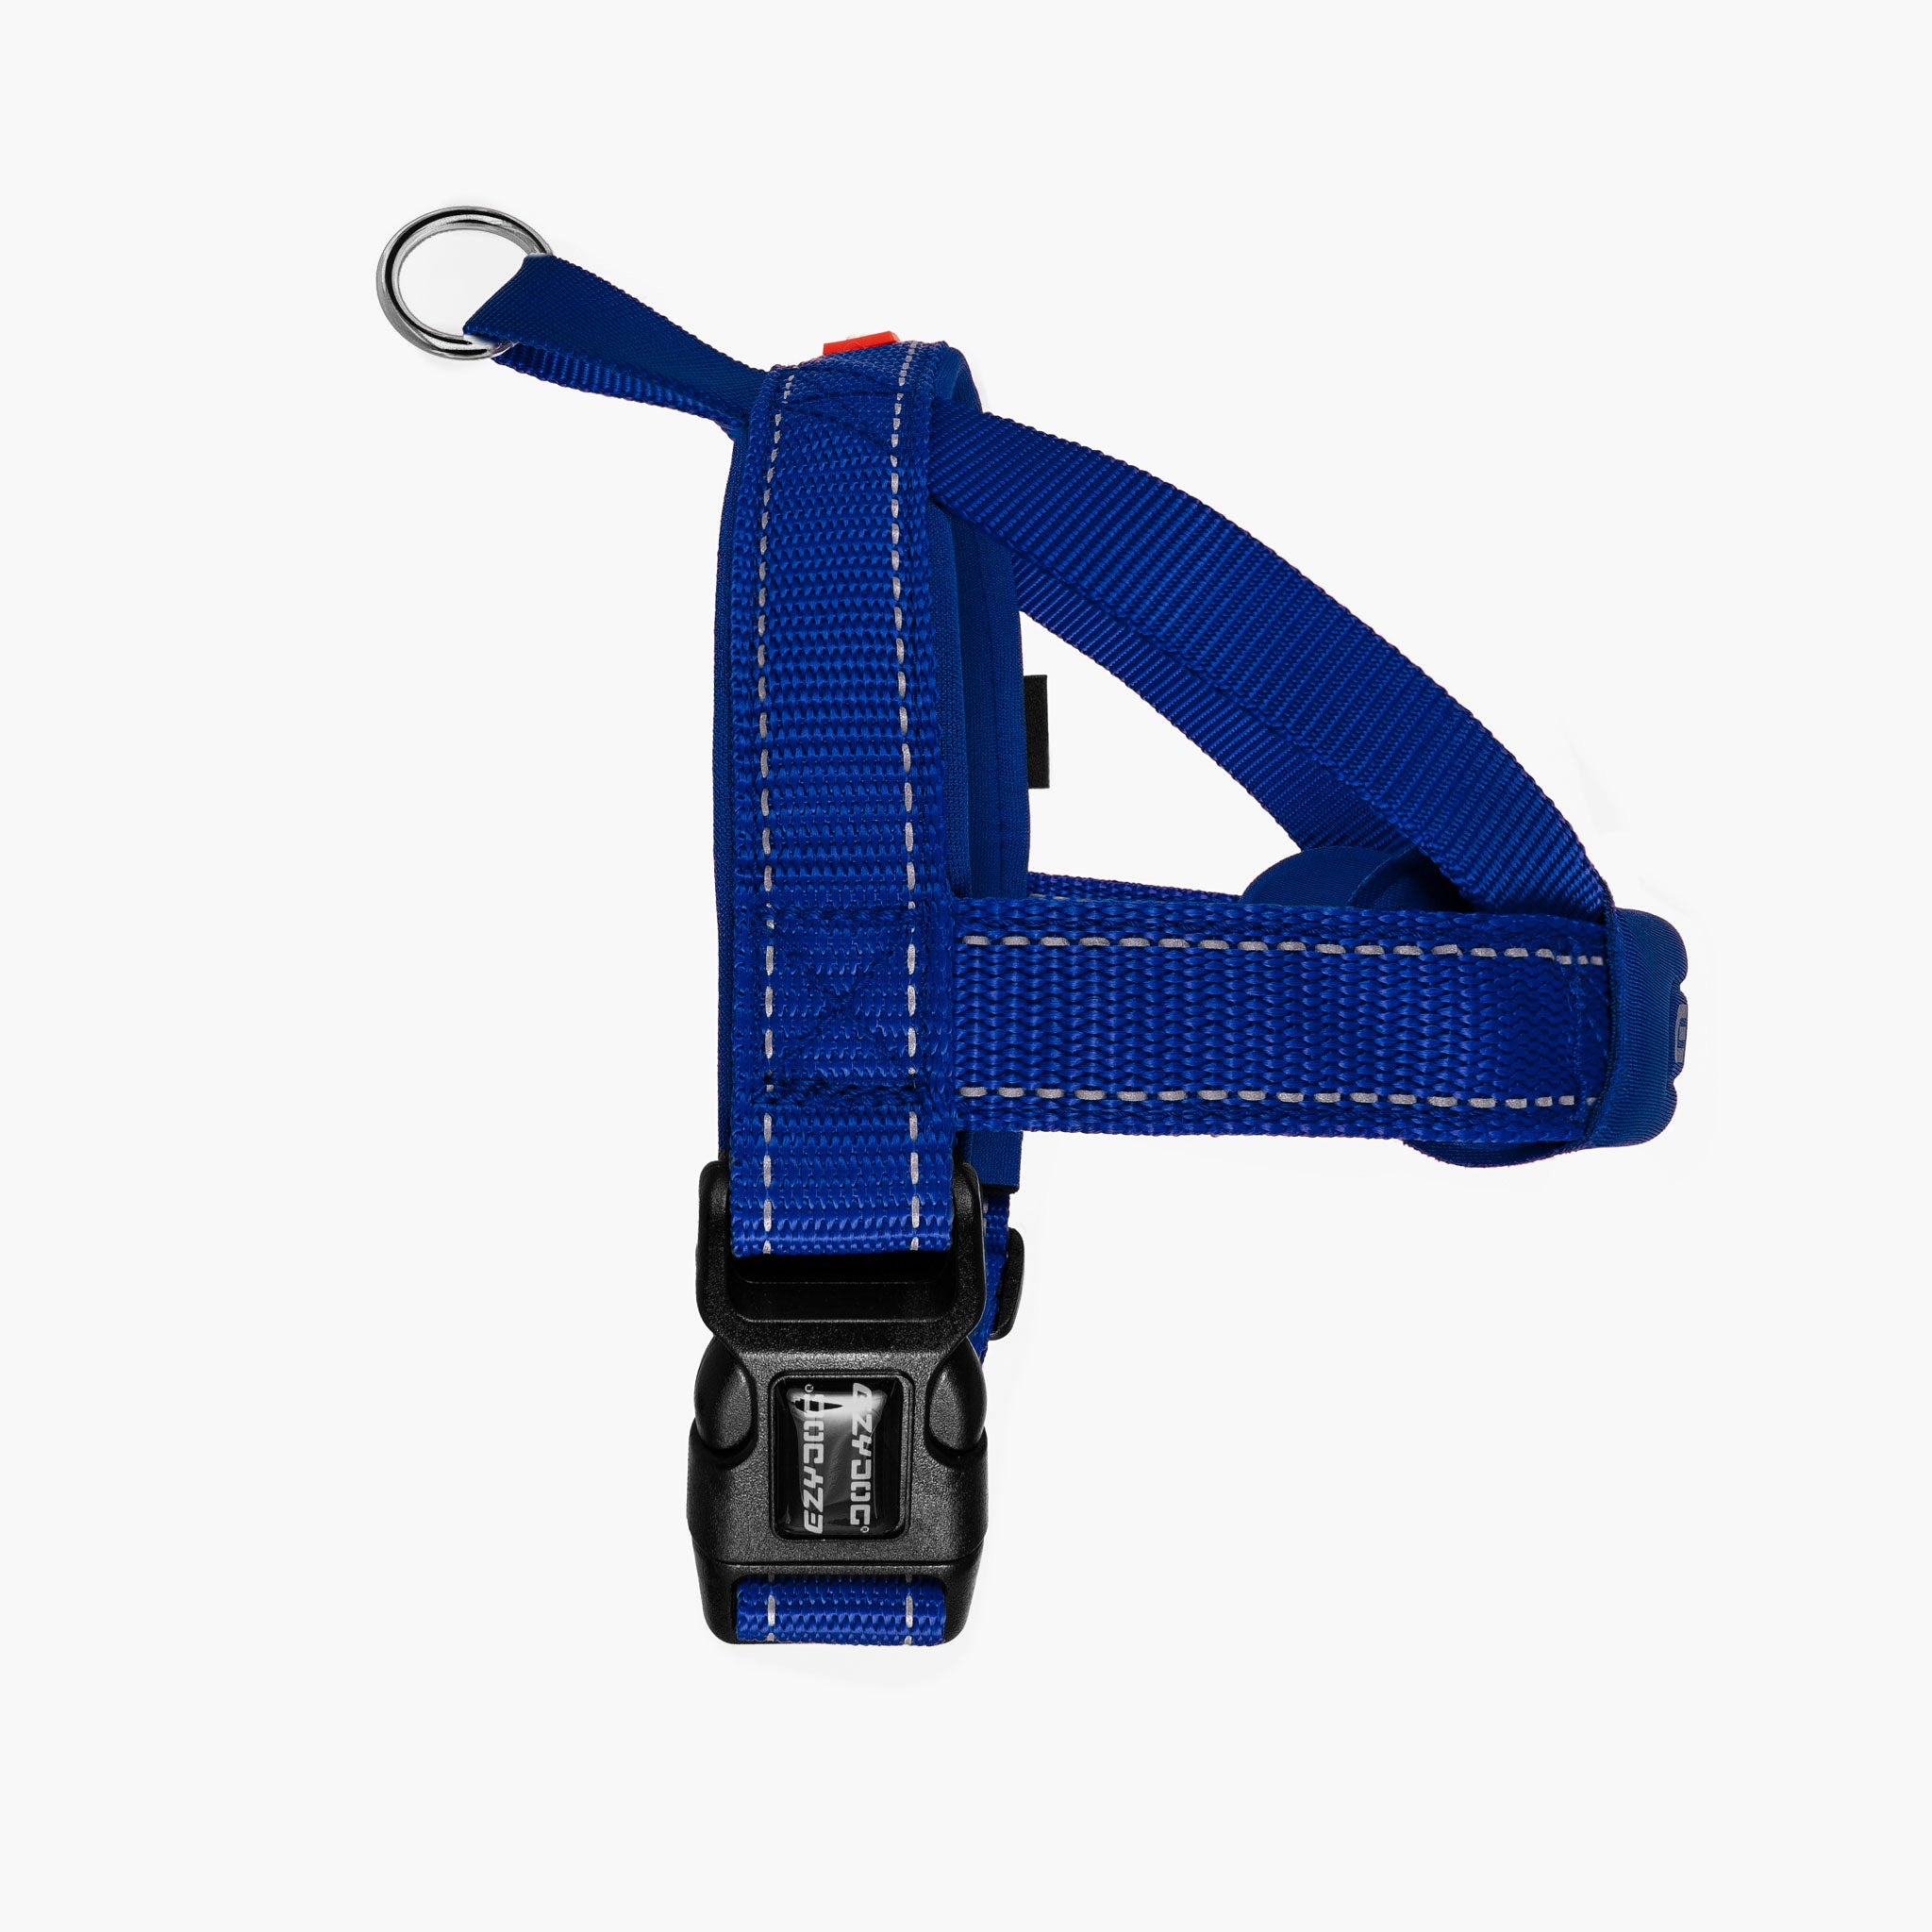 Quick Fit Harness